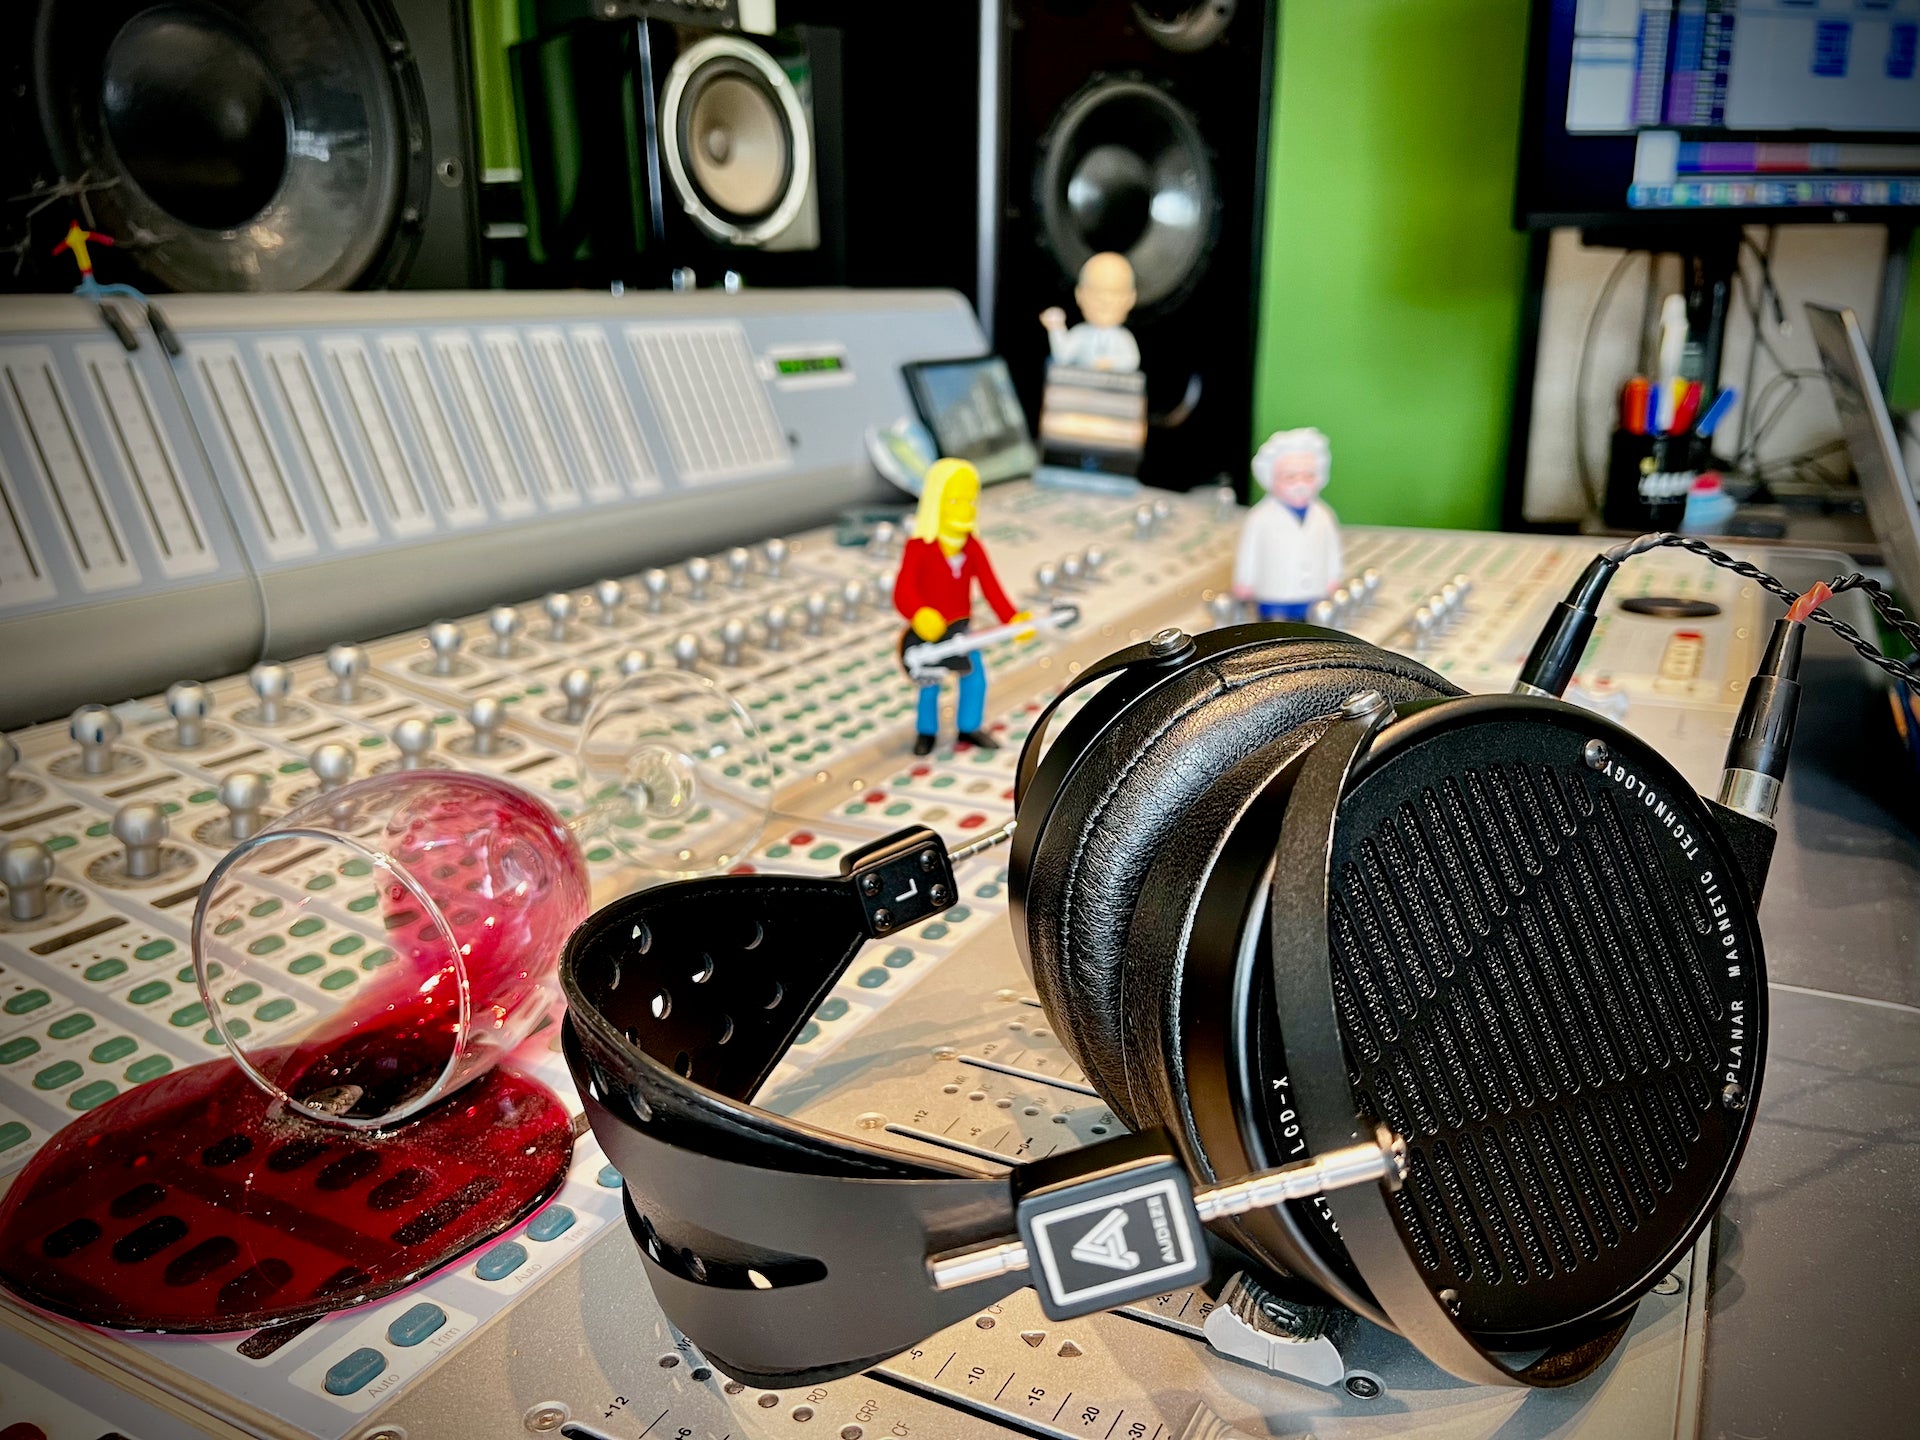 Audeze LCD-X headphones on mixing table with *fake* spilt wine and action figure